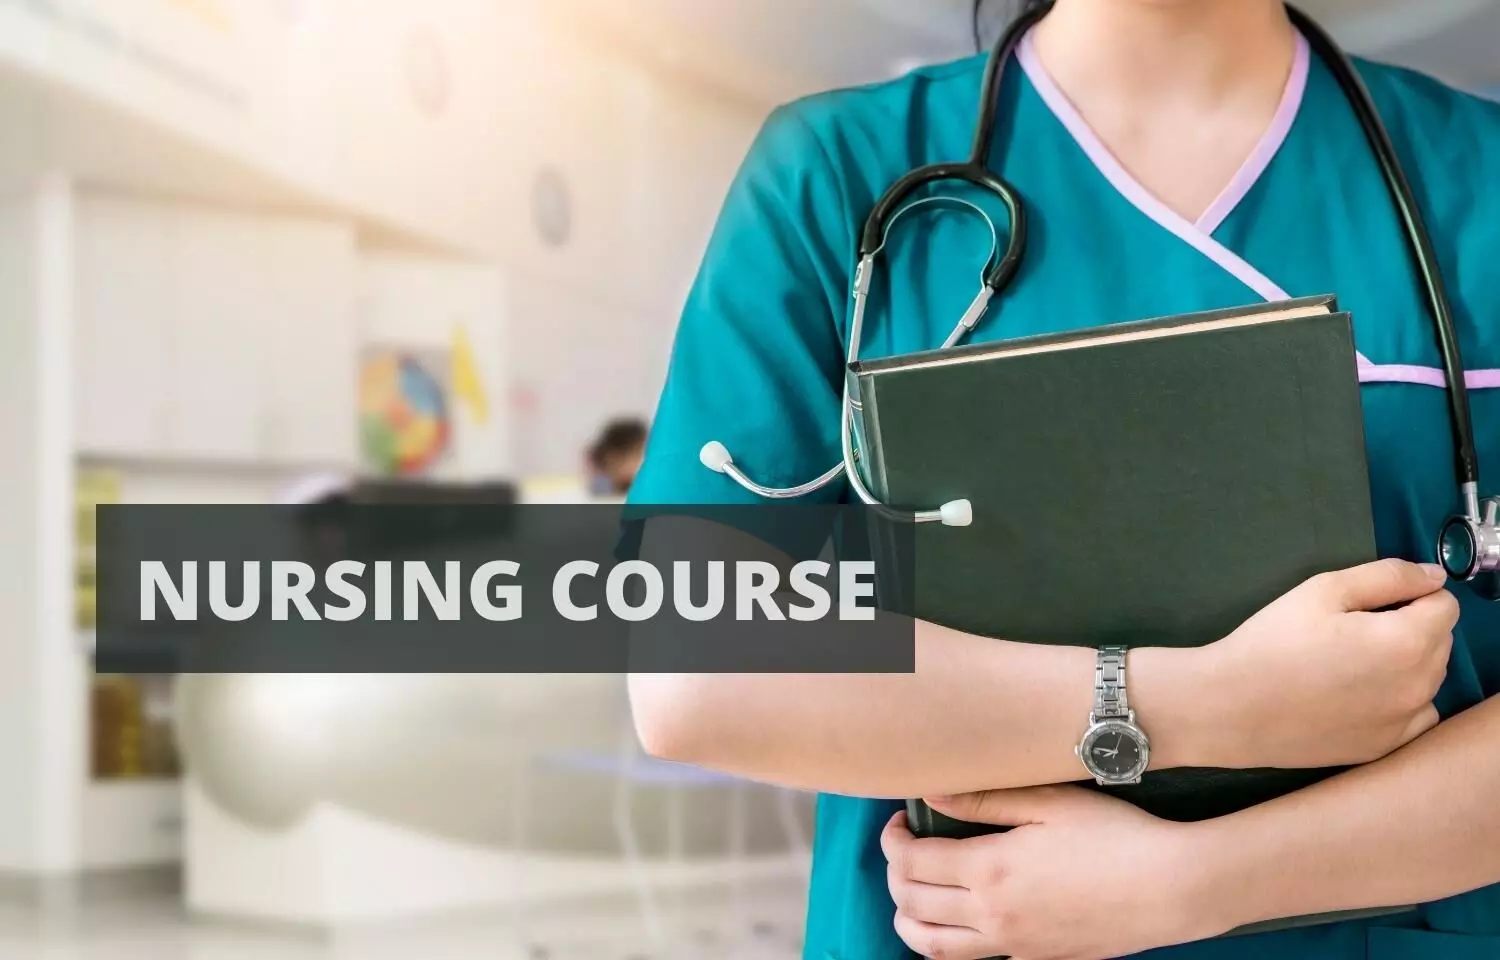 DME Chhatisgarh publishes First Allotment List Of BSc Nursing Course admissions, details